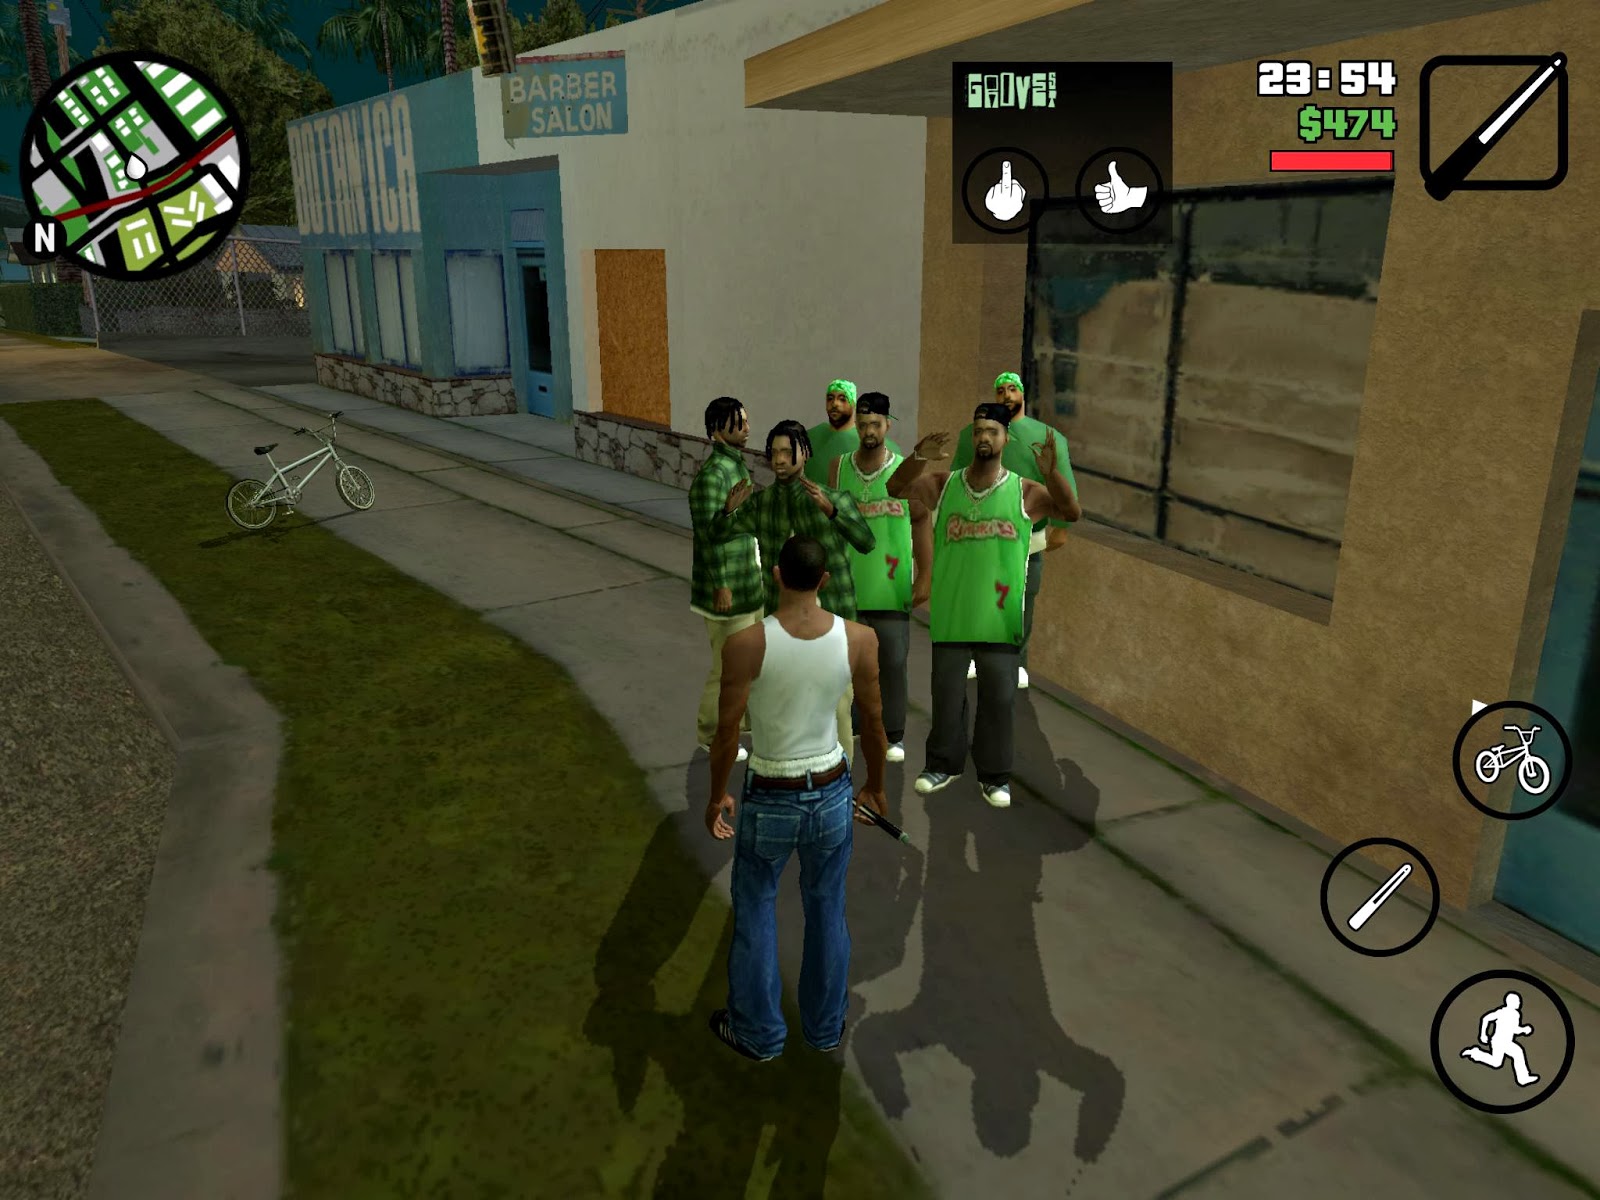 Grand Theft Auto San Andreas APK + DATA FILES Android Game Free